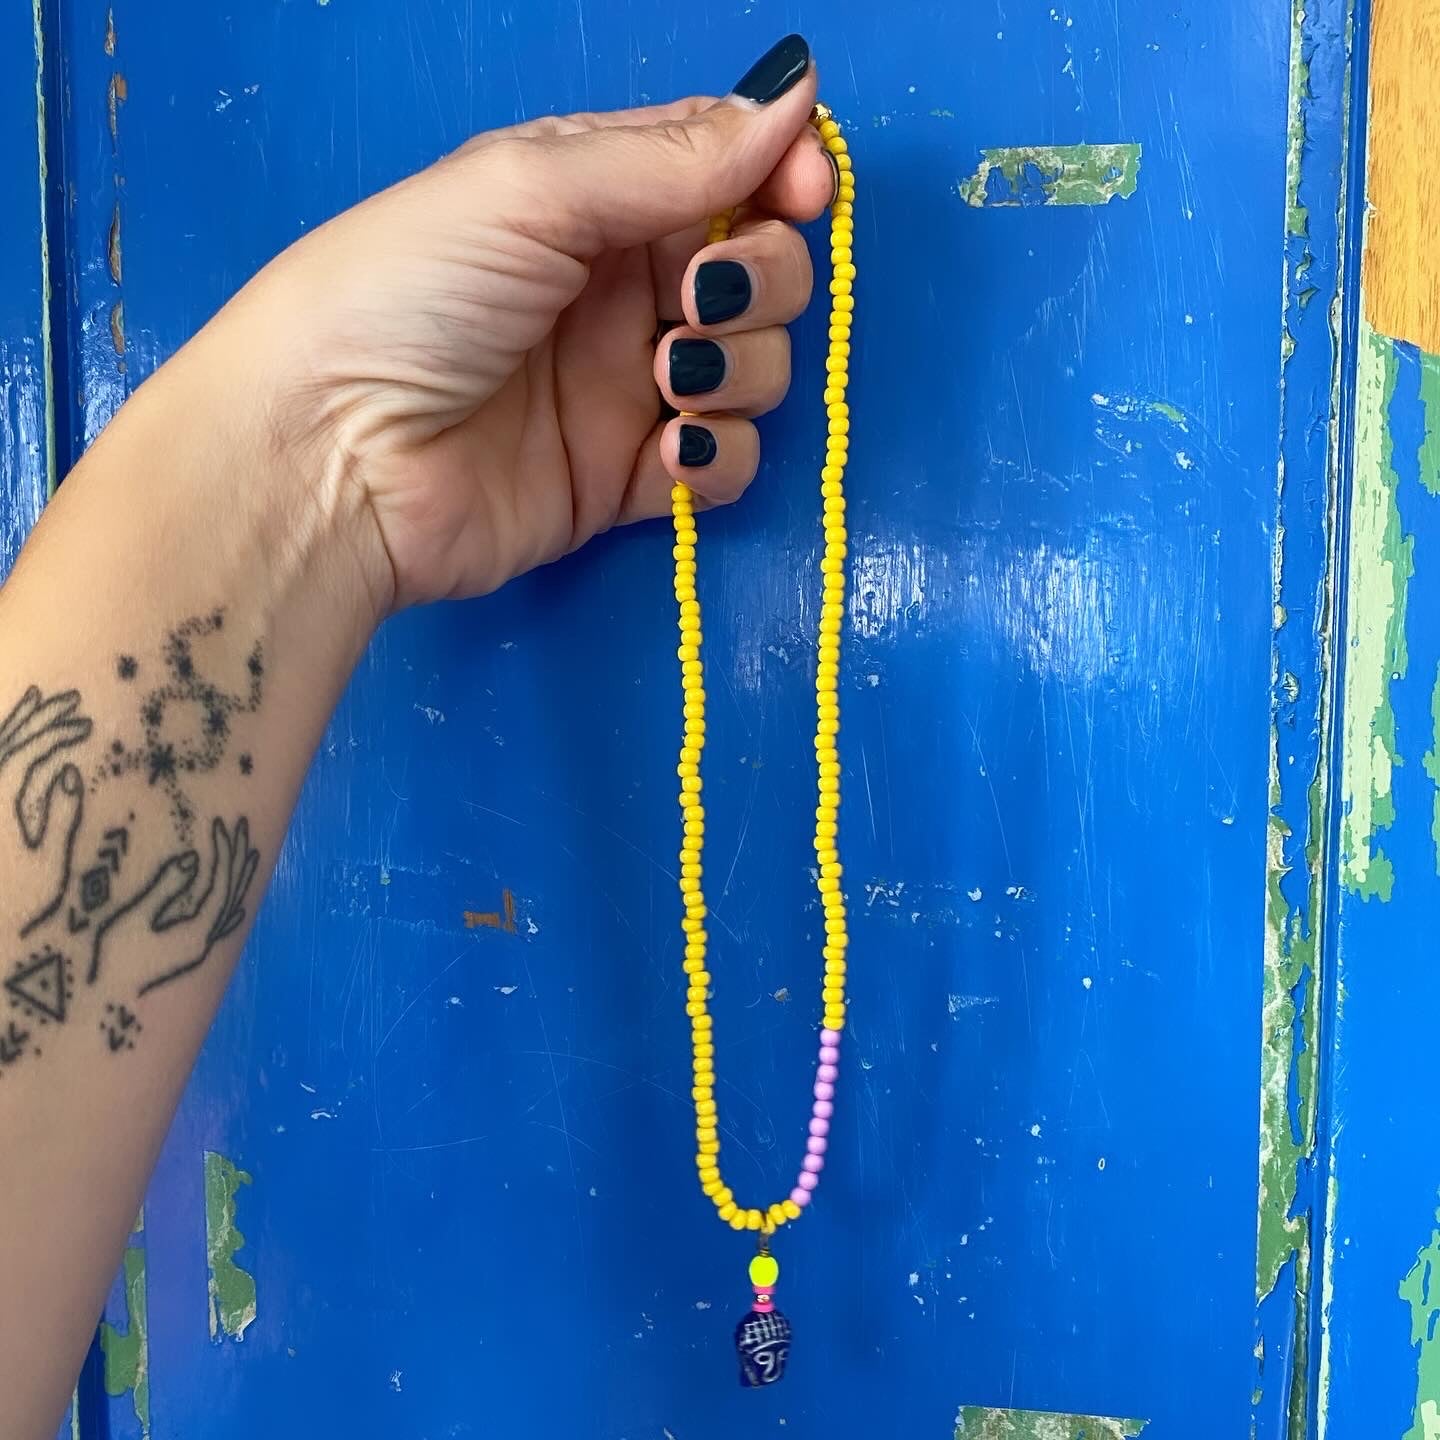 Blue Face Beaded Single Charm Necklace